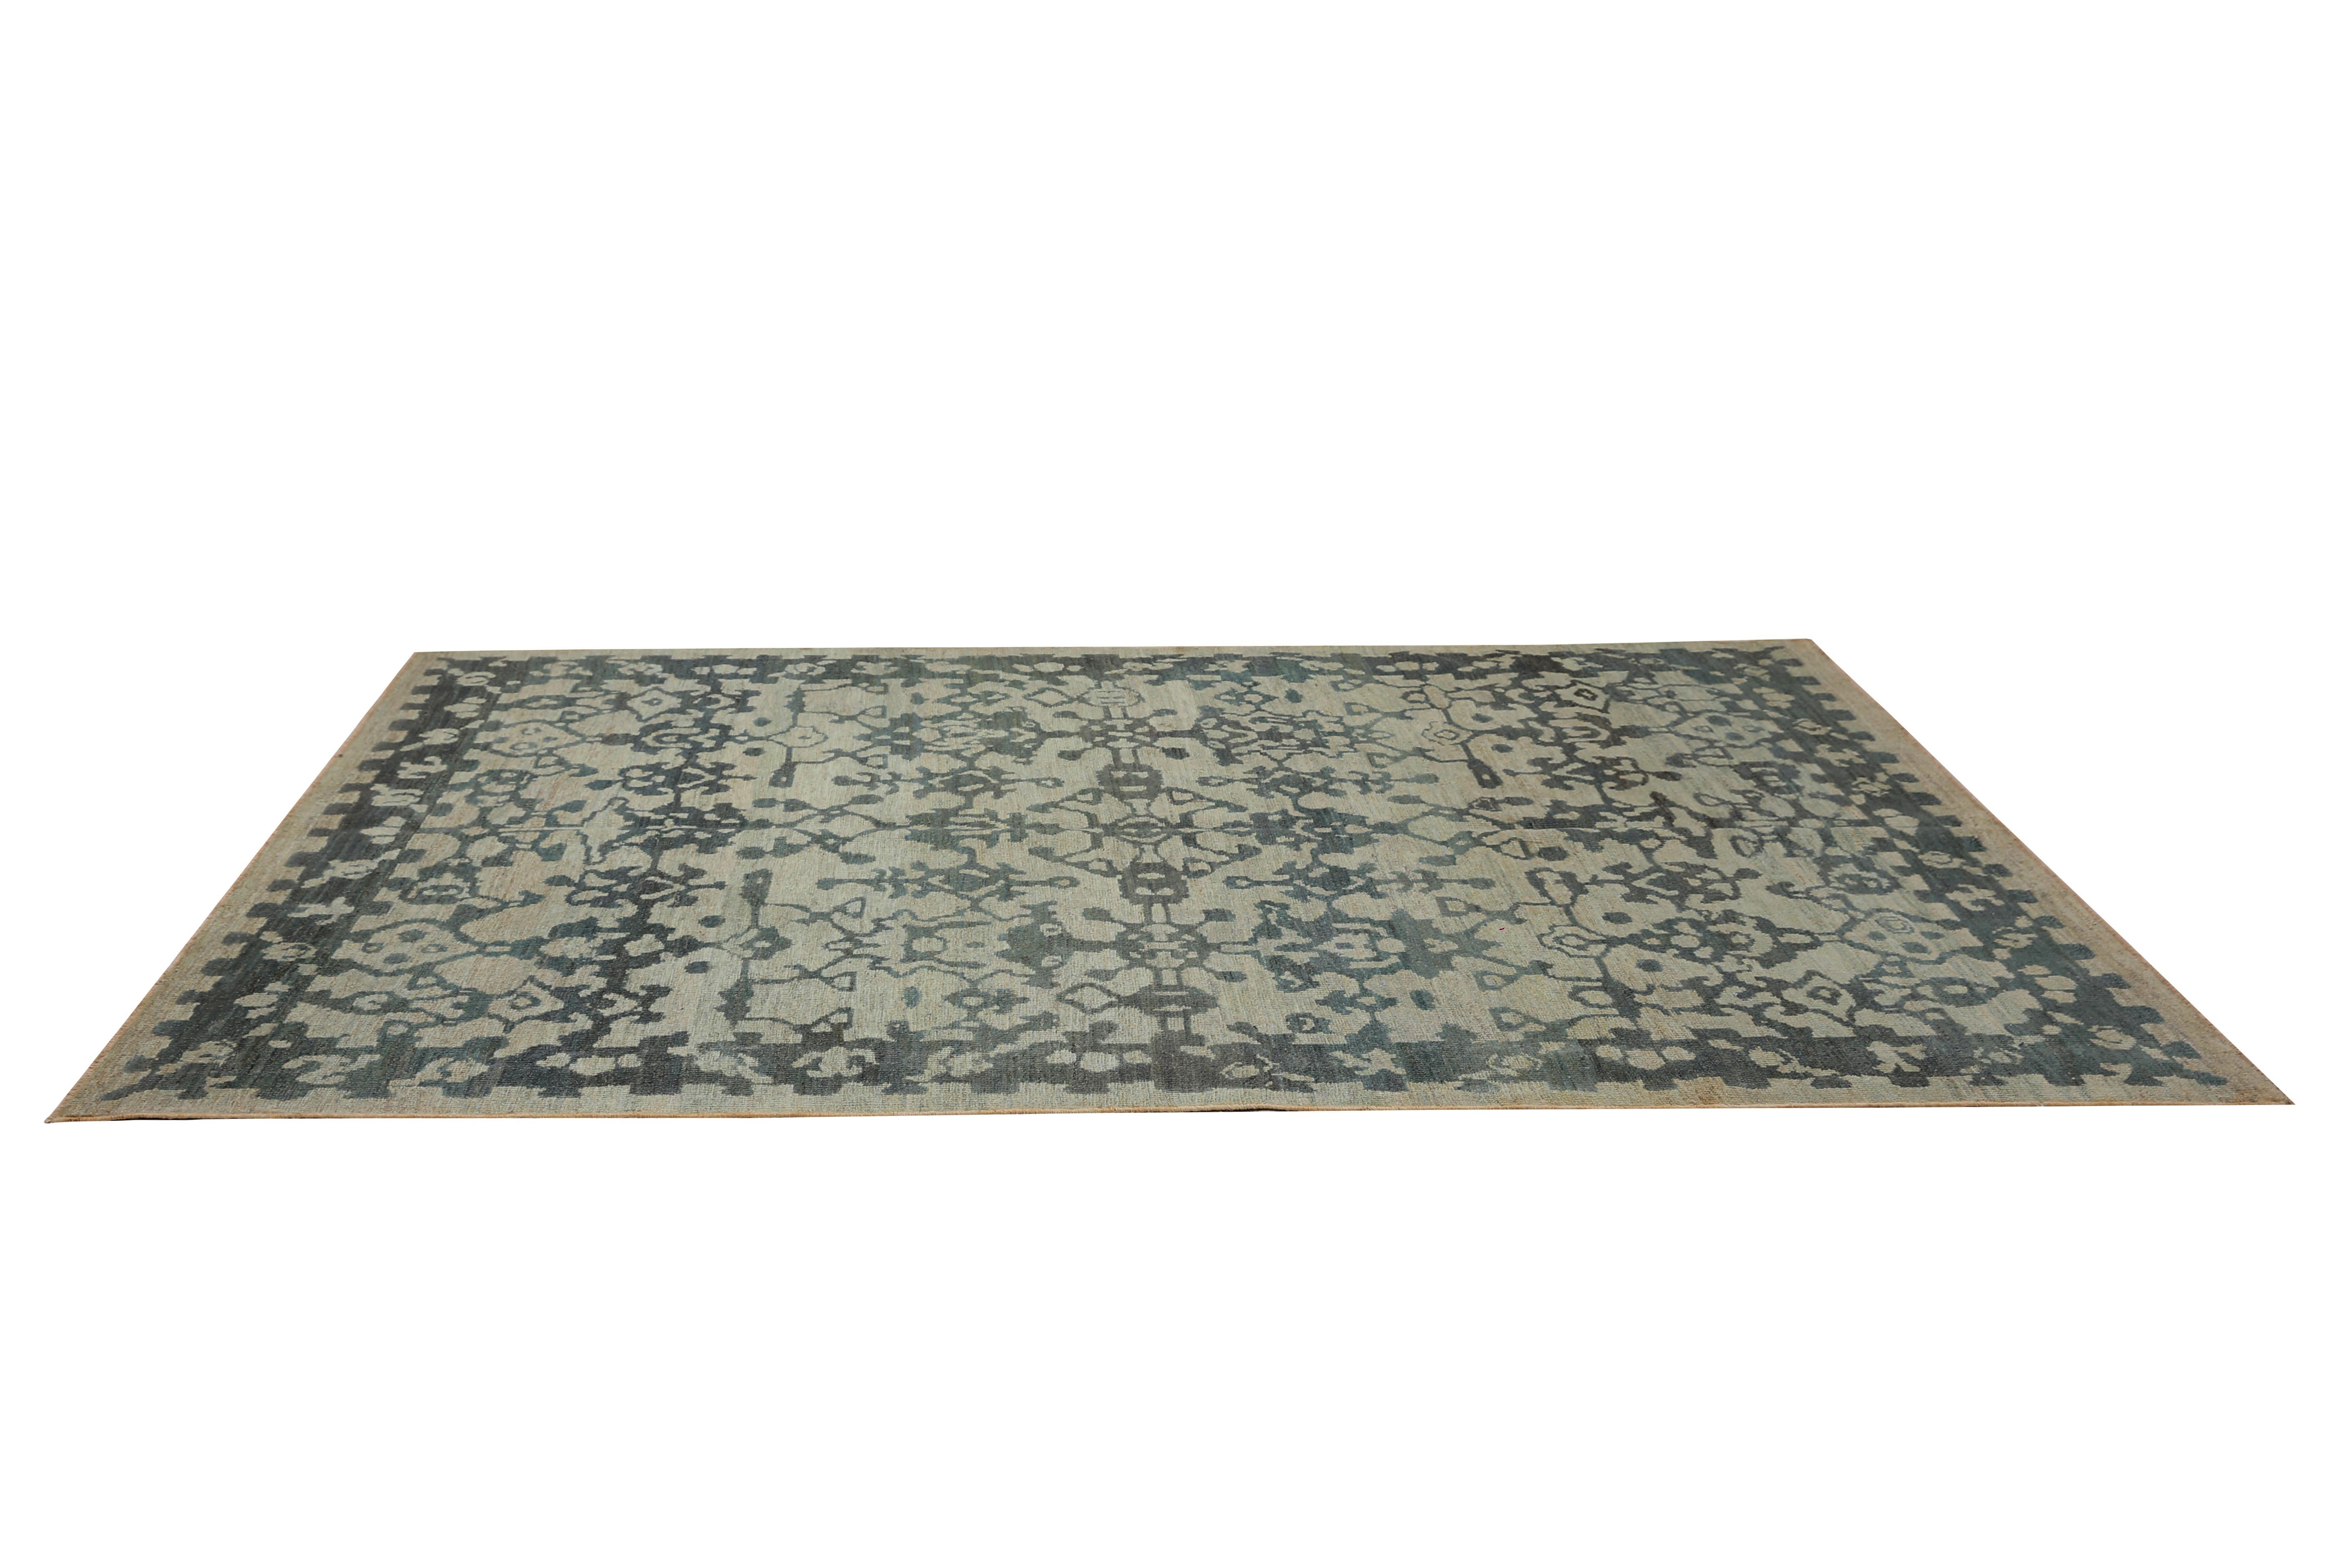 Luxurious Handmade Sultanabad Rug - Transitional Design, Blue Tones - 5'10'' x 8 In New Condition For Sale In Dallas, TX